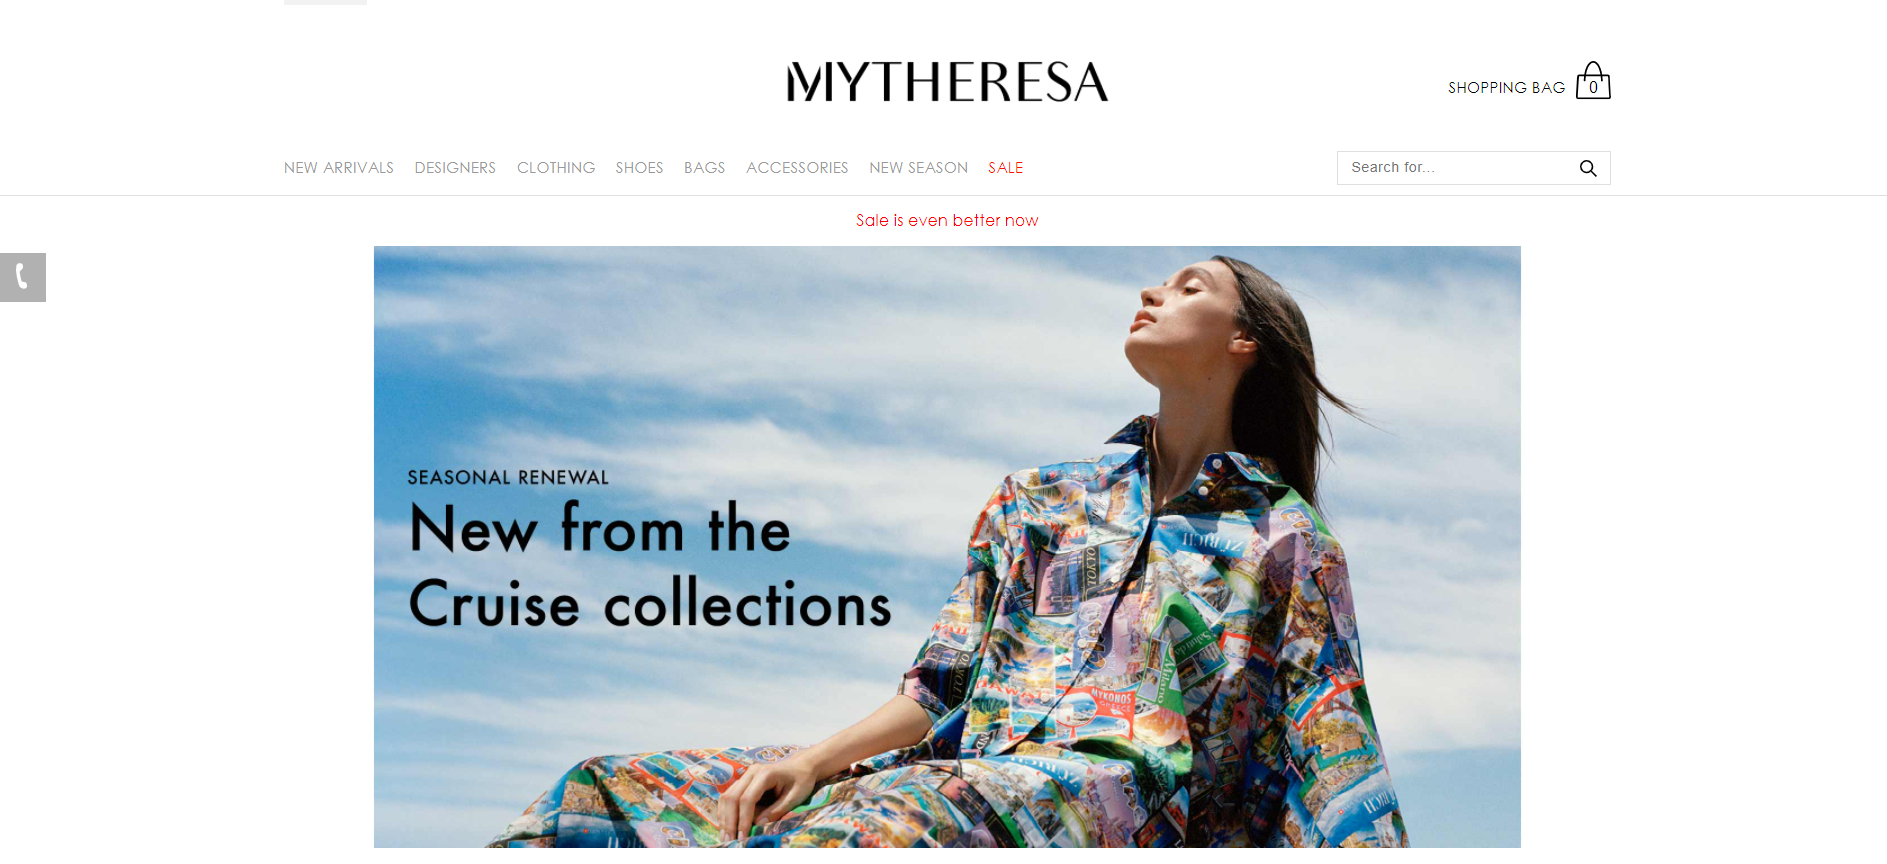 MyTheresa offers promo code for fashion lovers: Shop the